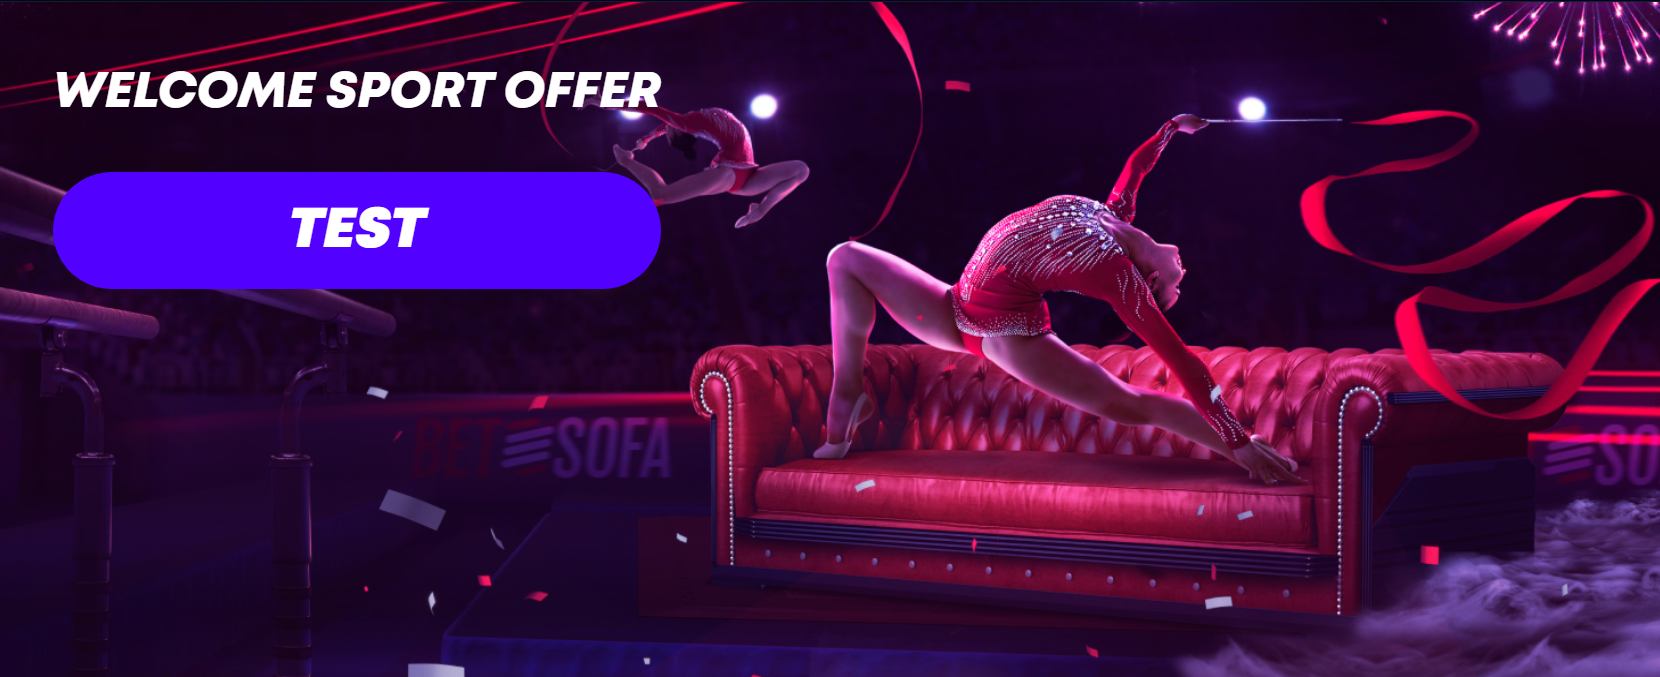 Betsofa Casino Welcome Sports Offer